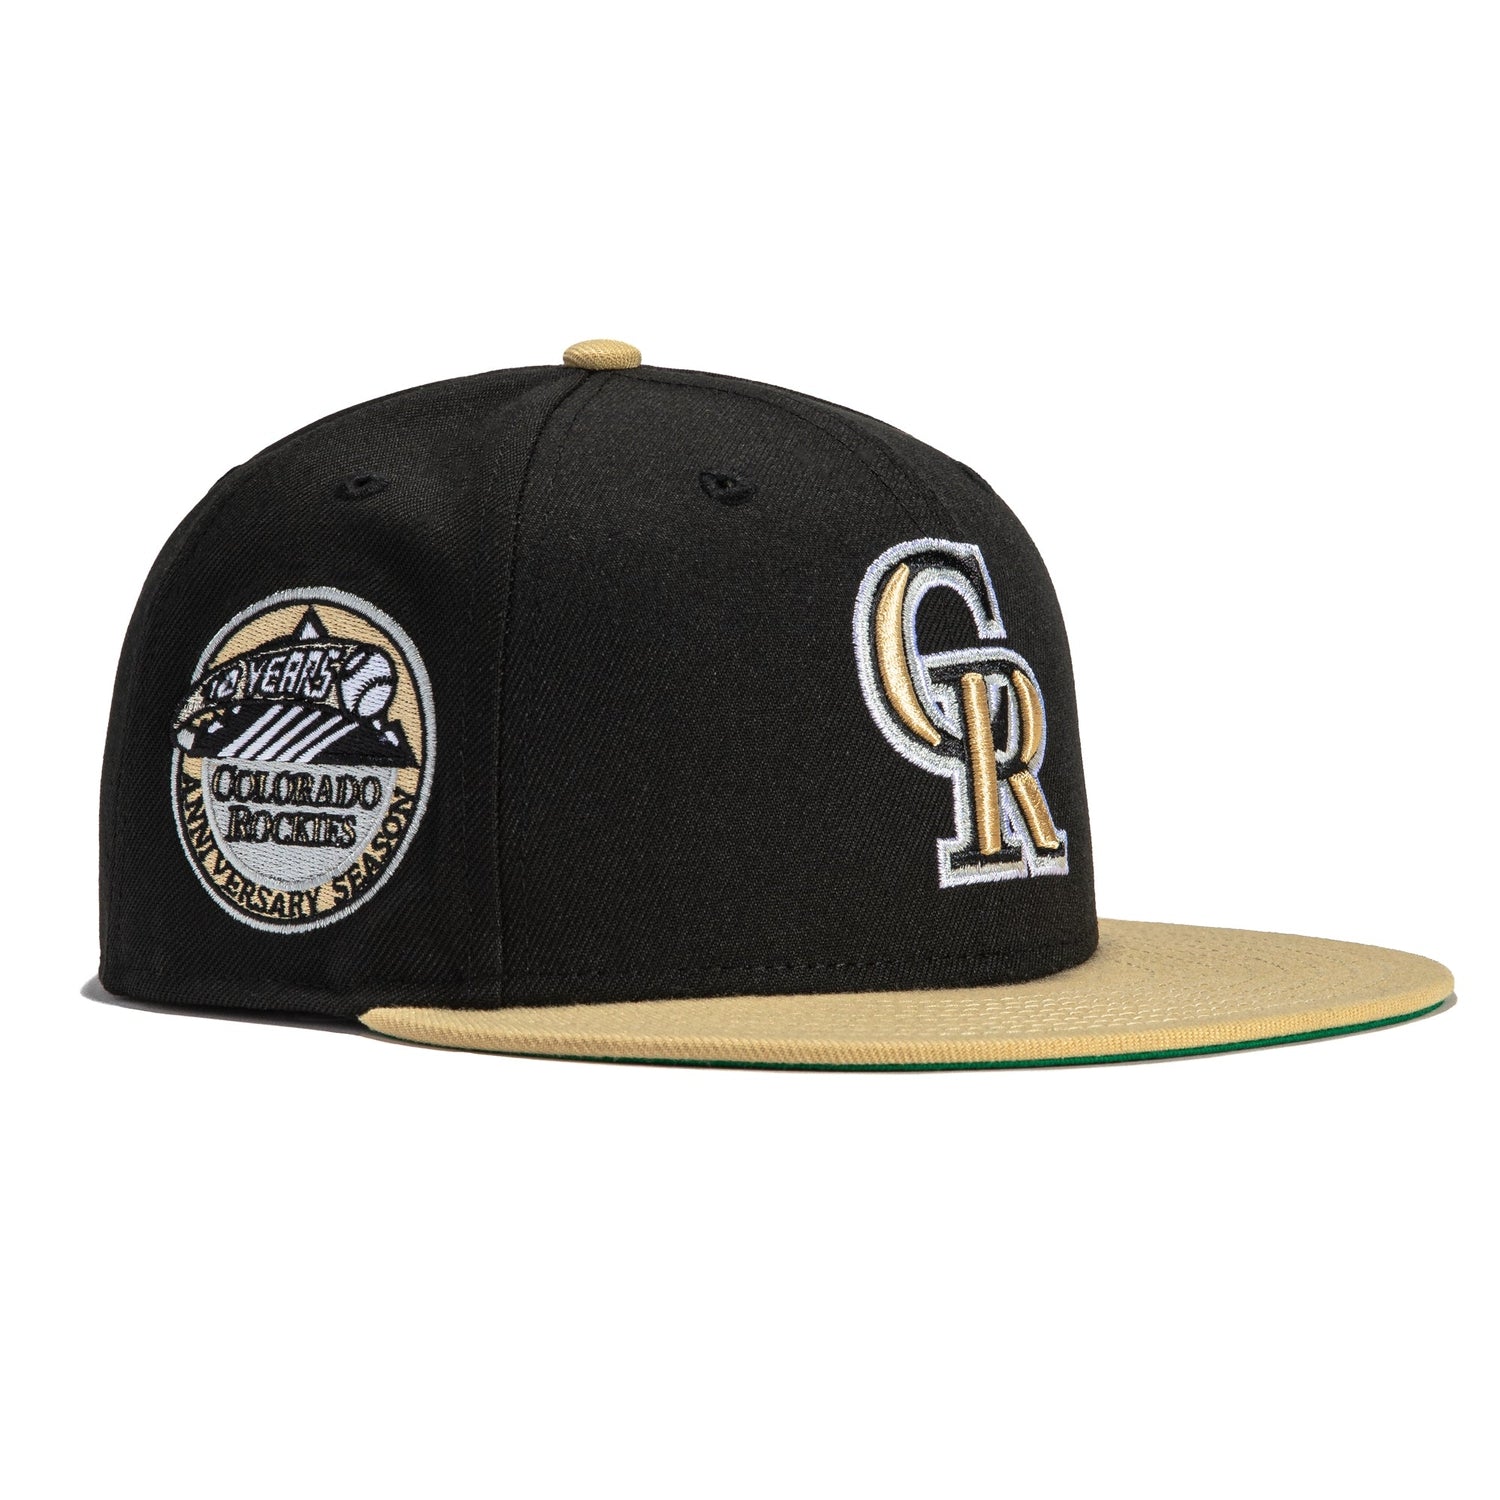 New Era Colorado Rockies Cyberpunks 10th Anniversary Patch Hat Club Exclusive 59FIFTY Fitted Hat Navy